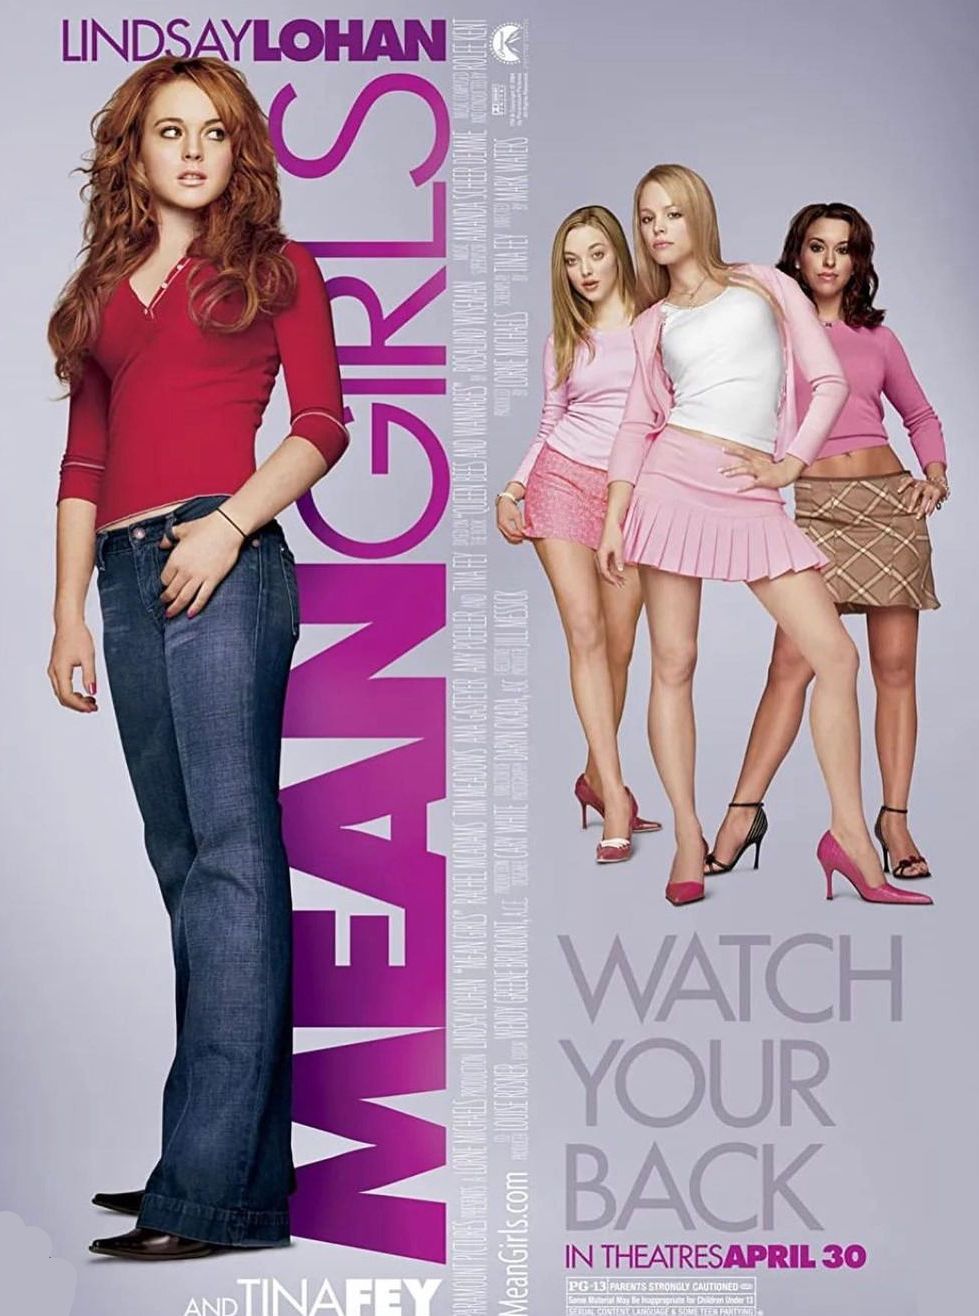 Hallmark's Lacey Chabert celebrates 19 years since Mean Girls was released